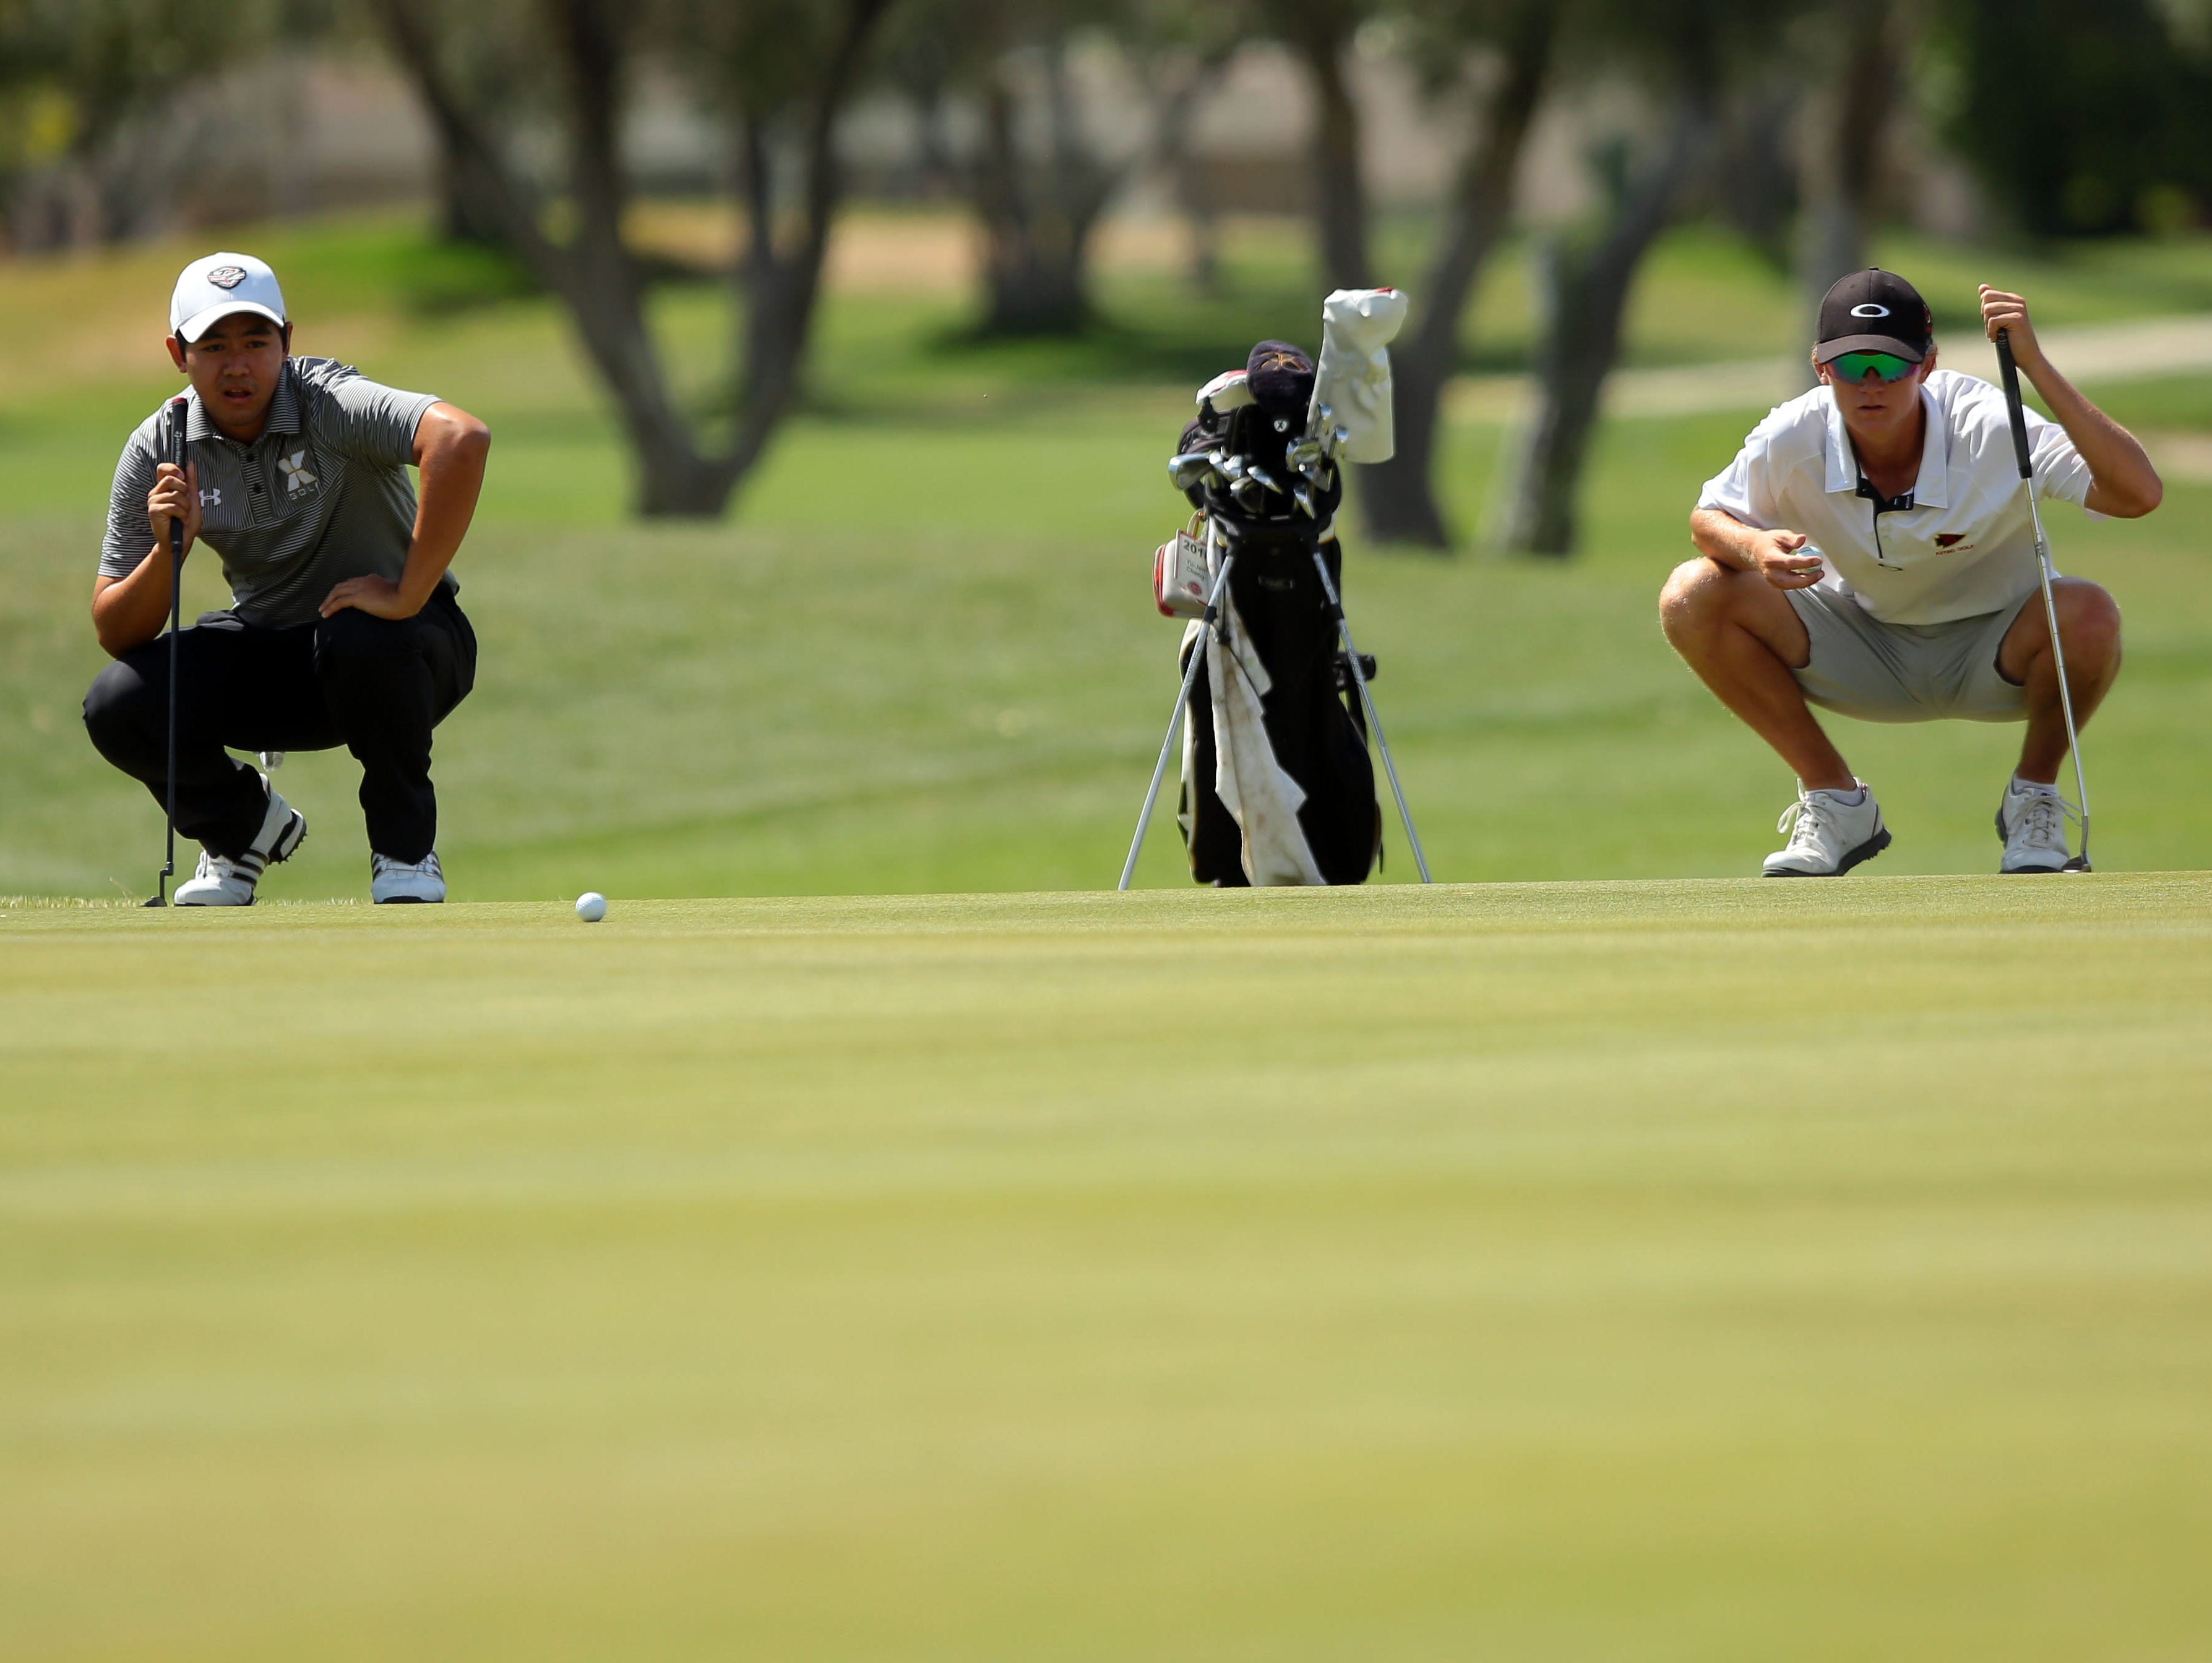 Xavier's Shawn Tsai (left) and Palm Desert's Jake Vincent (right) simultaneously read the ninth green during the Desert Valley League boys golf individual championship tournament Thursday, April 28, 2016, on the North Course at Indian Canyons Golf Resort in Palm Springs, Calif.